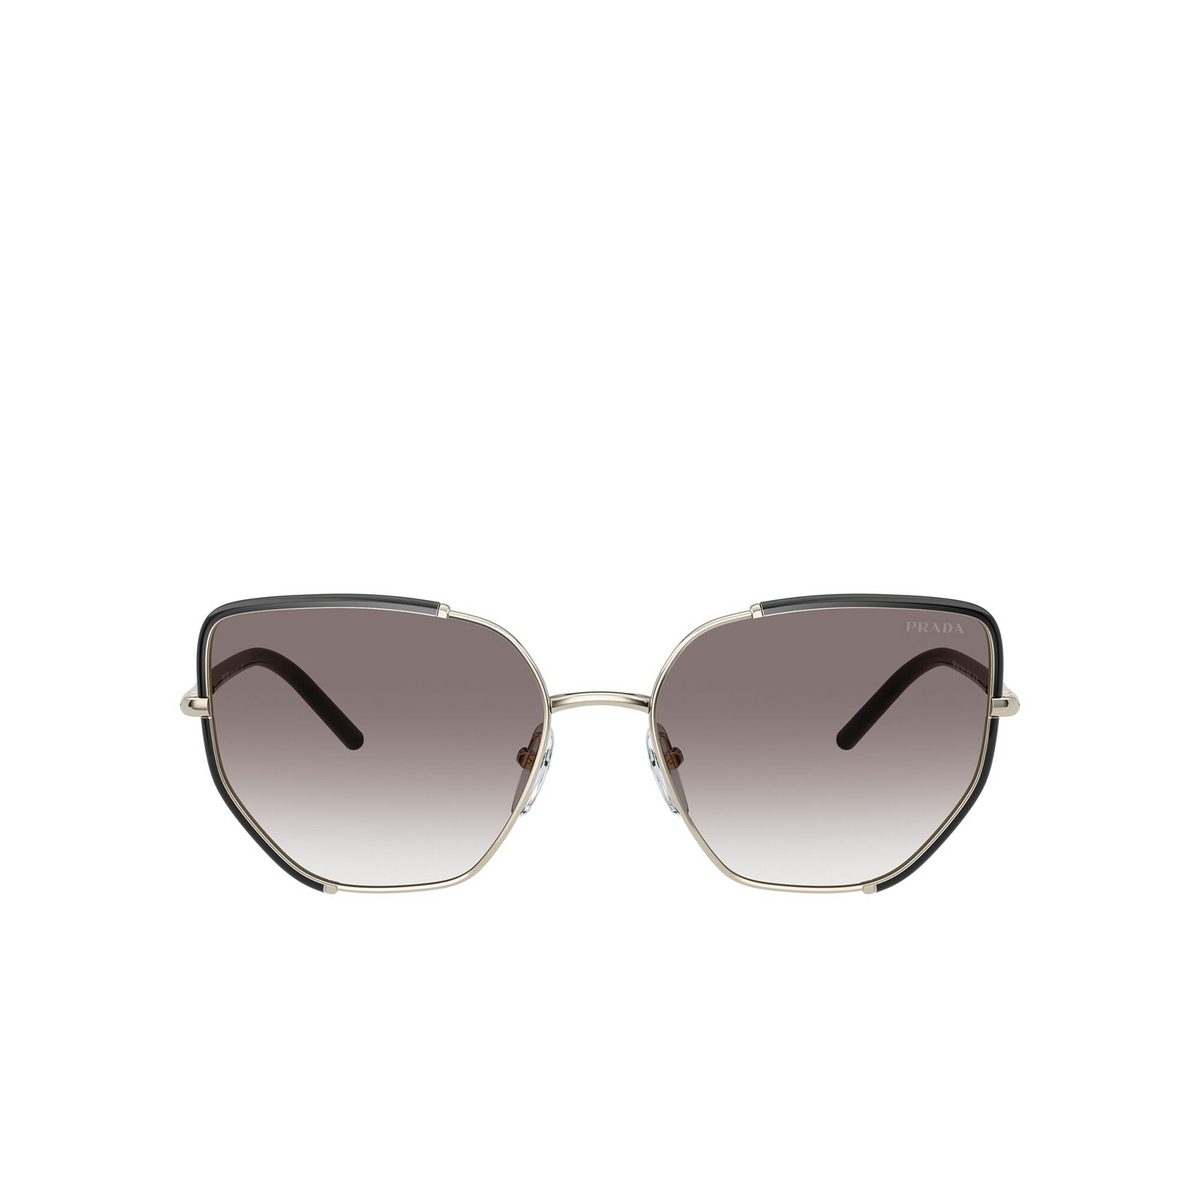 Prada® Butterfly Sunglasses: PR 50WS color Black / Pale Gold AAV0A7 - front view.